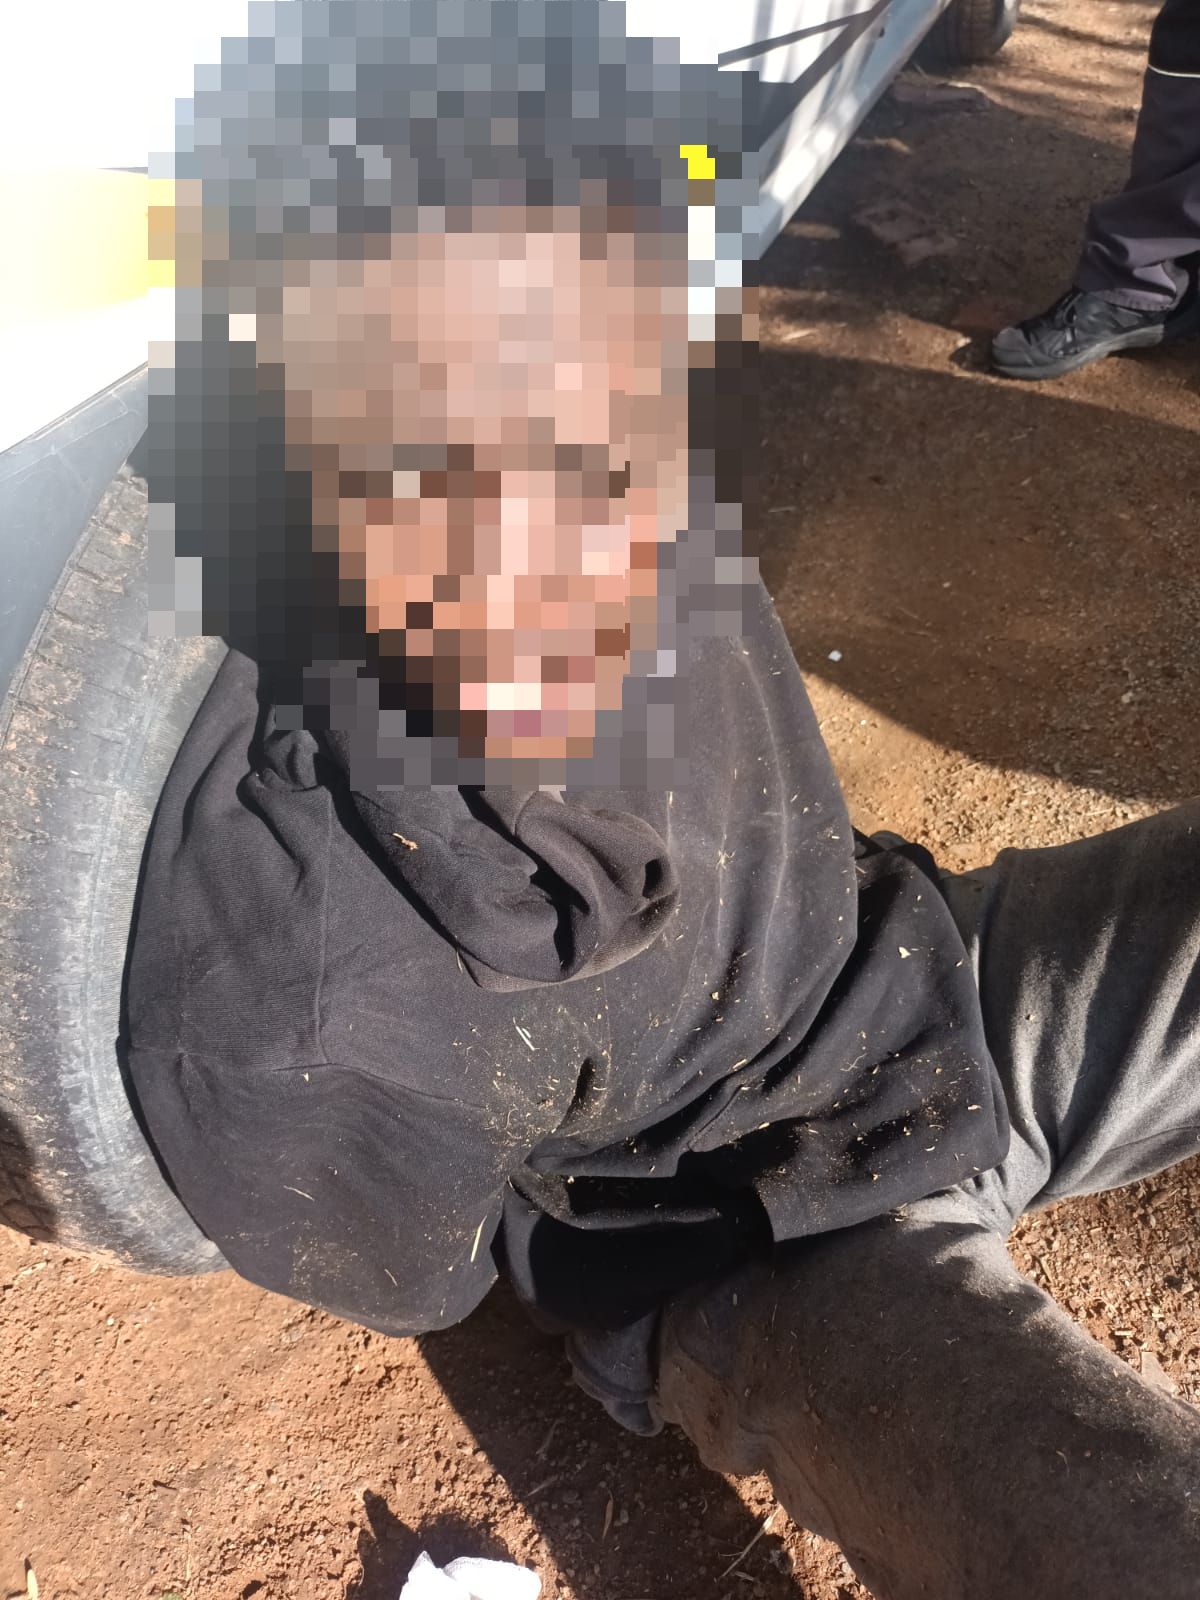 One suspect arrested for mugging a 13-year-old schoolchild at knifepoint in Bloemfontein